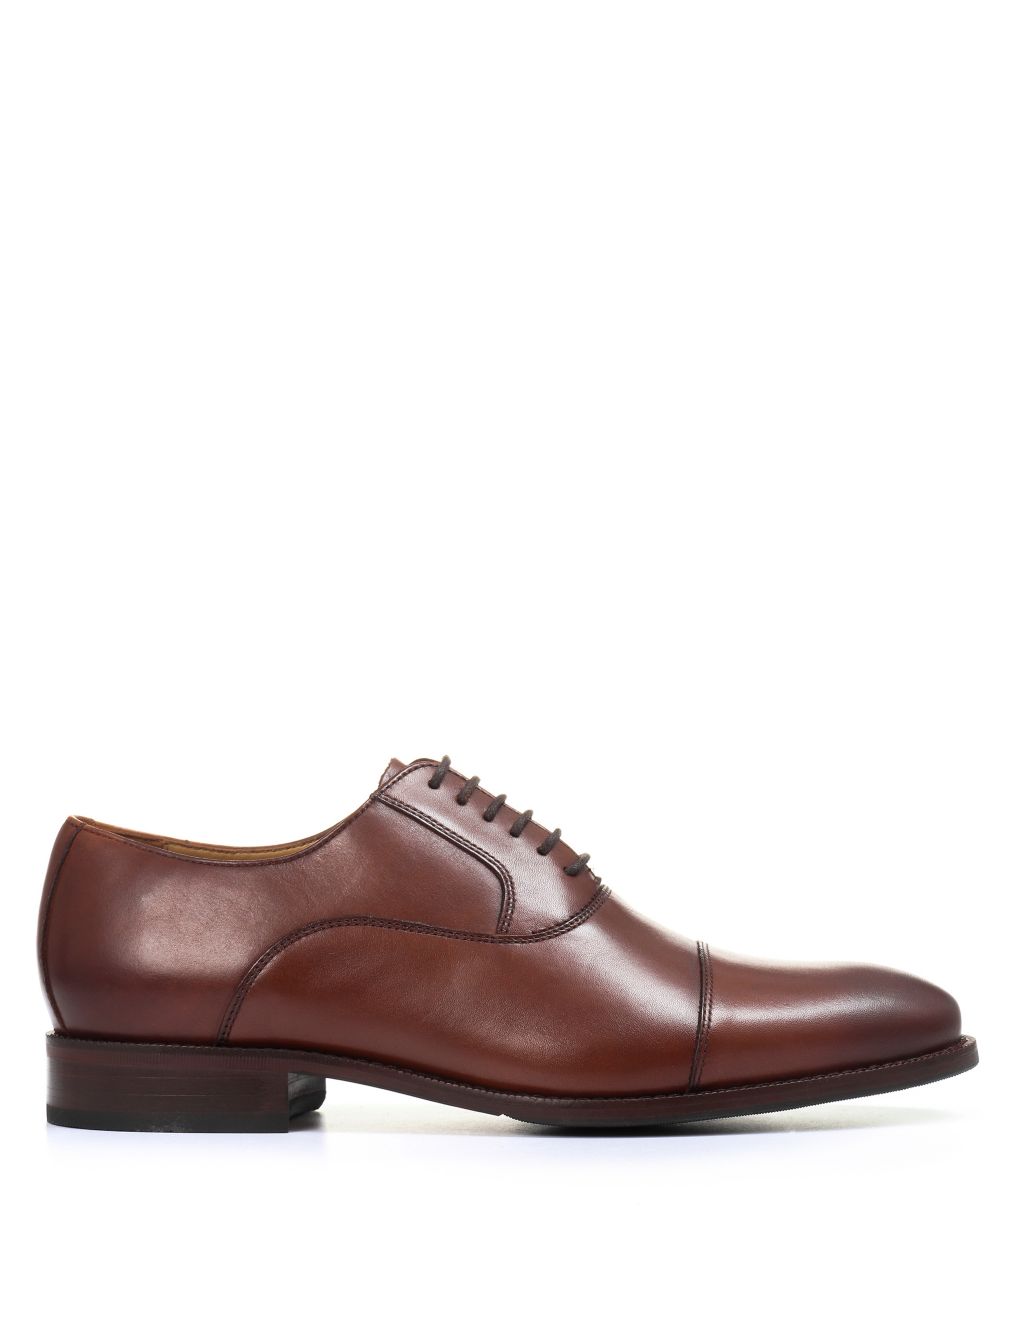 Wide Fit Leather Oxford Shoes image 1